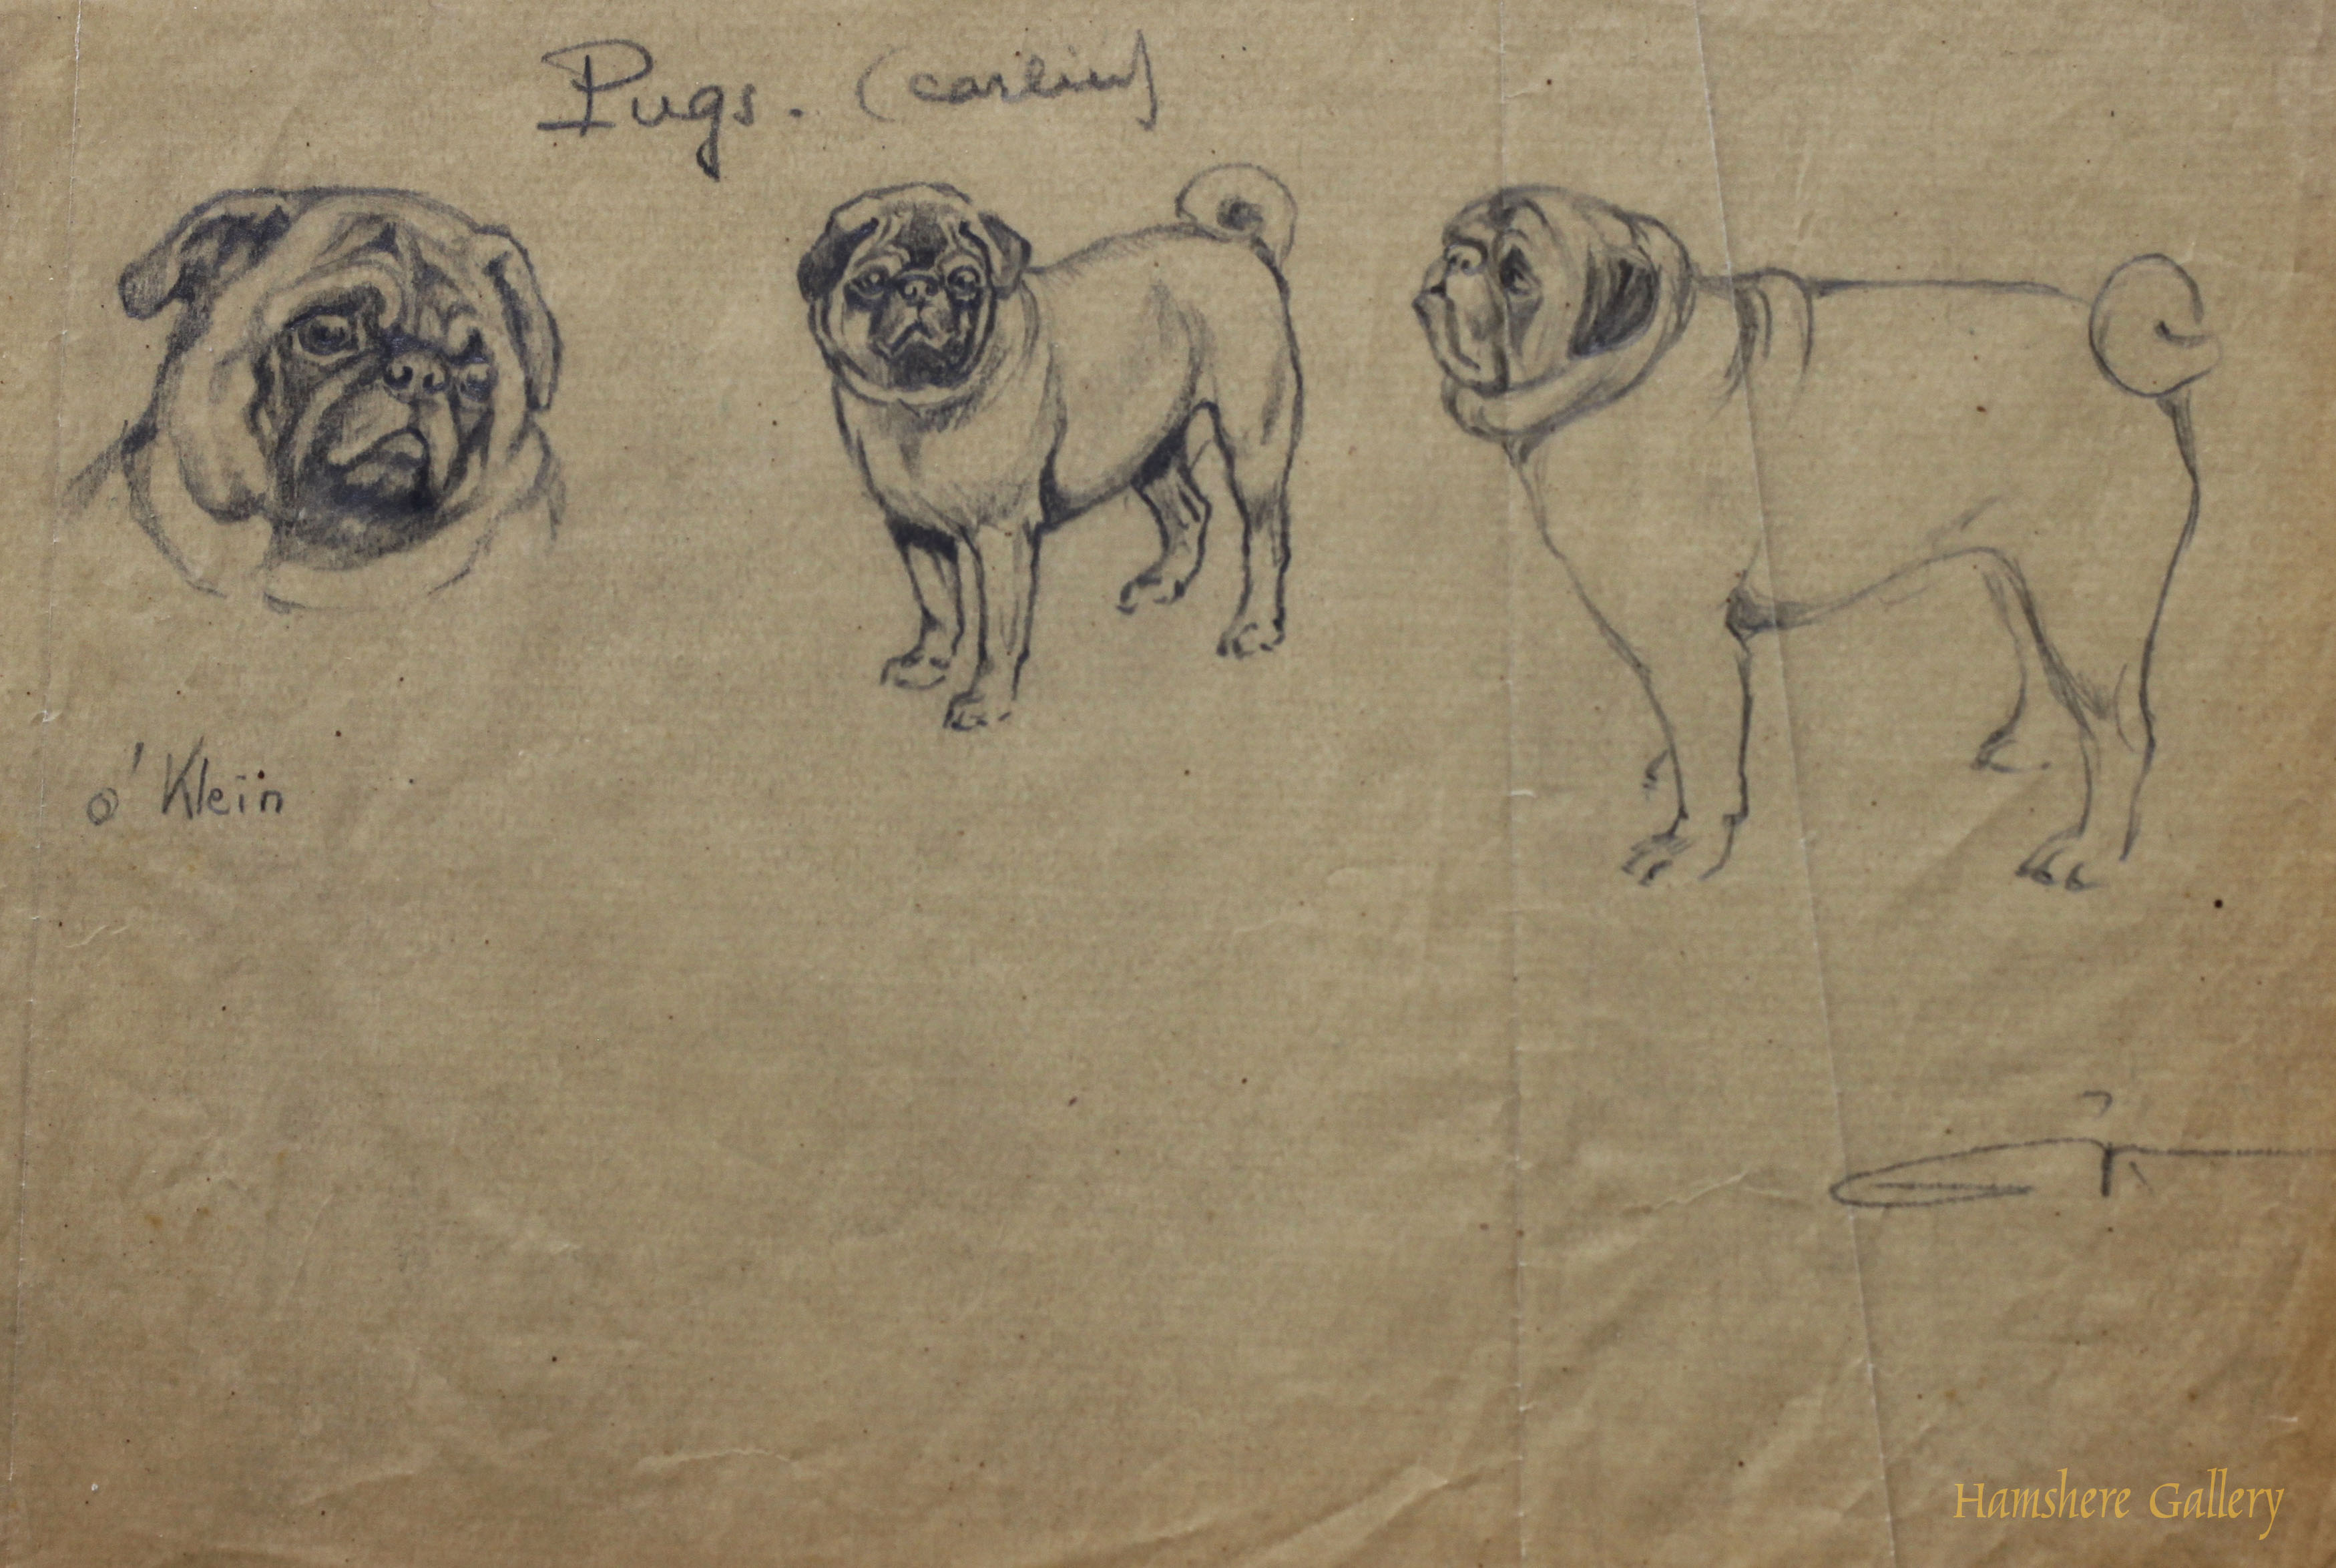 Click for larger image: Pug / Carlin / Mops pencil studies by Borris O’Klein / Jean Herblet  - Pug / Carlin / Mops pencil studies by Borris O’Klein / Jean Herblet 